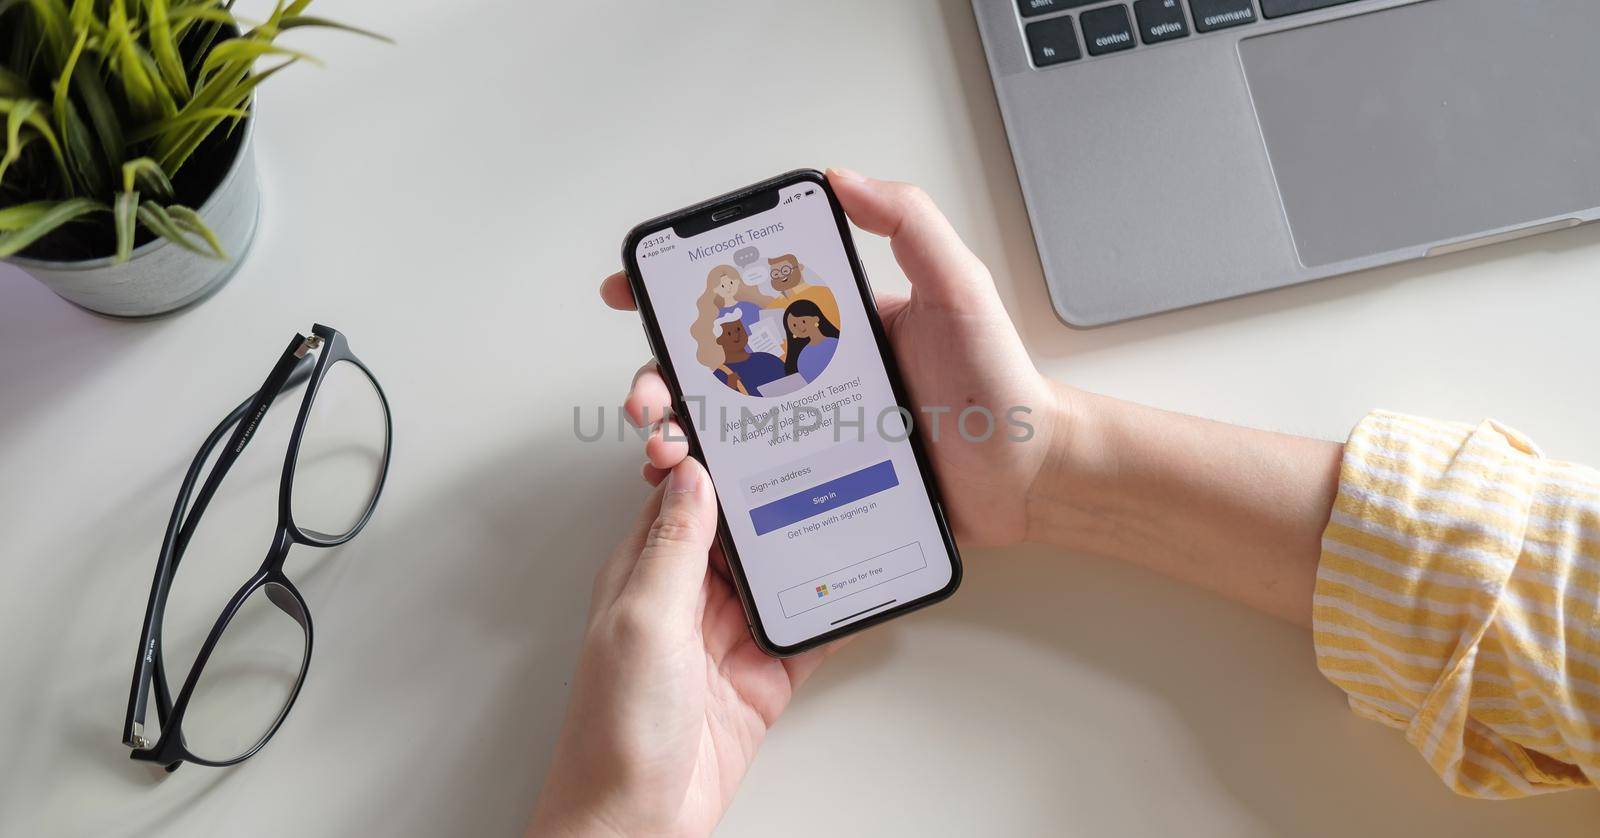 CHIANG MAI, THAILAND - JULY 3, 2020 : A working from home employee is downloading the Microsoft Teams social platform, ready for remote working in isolation from home